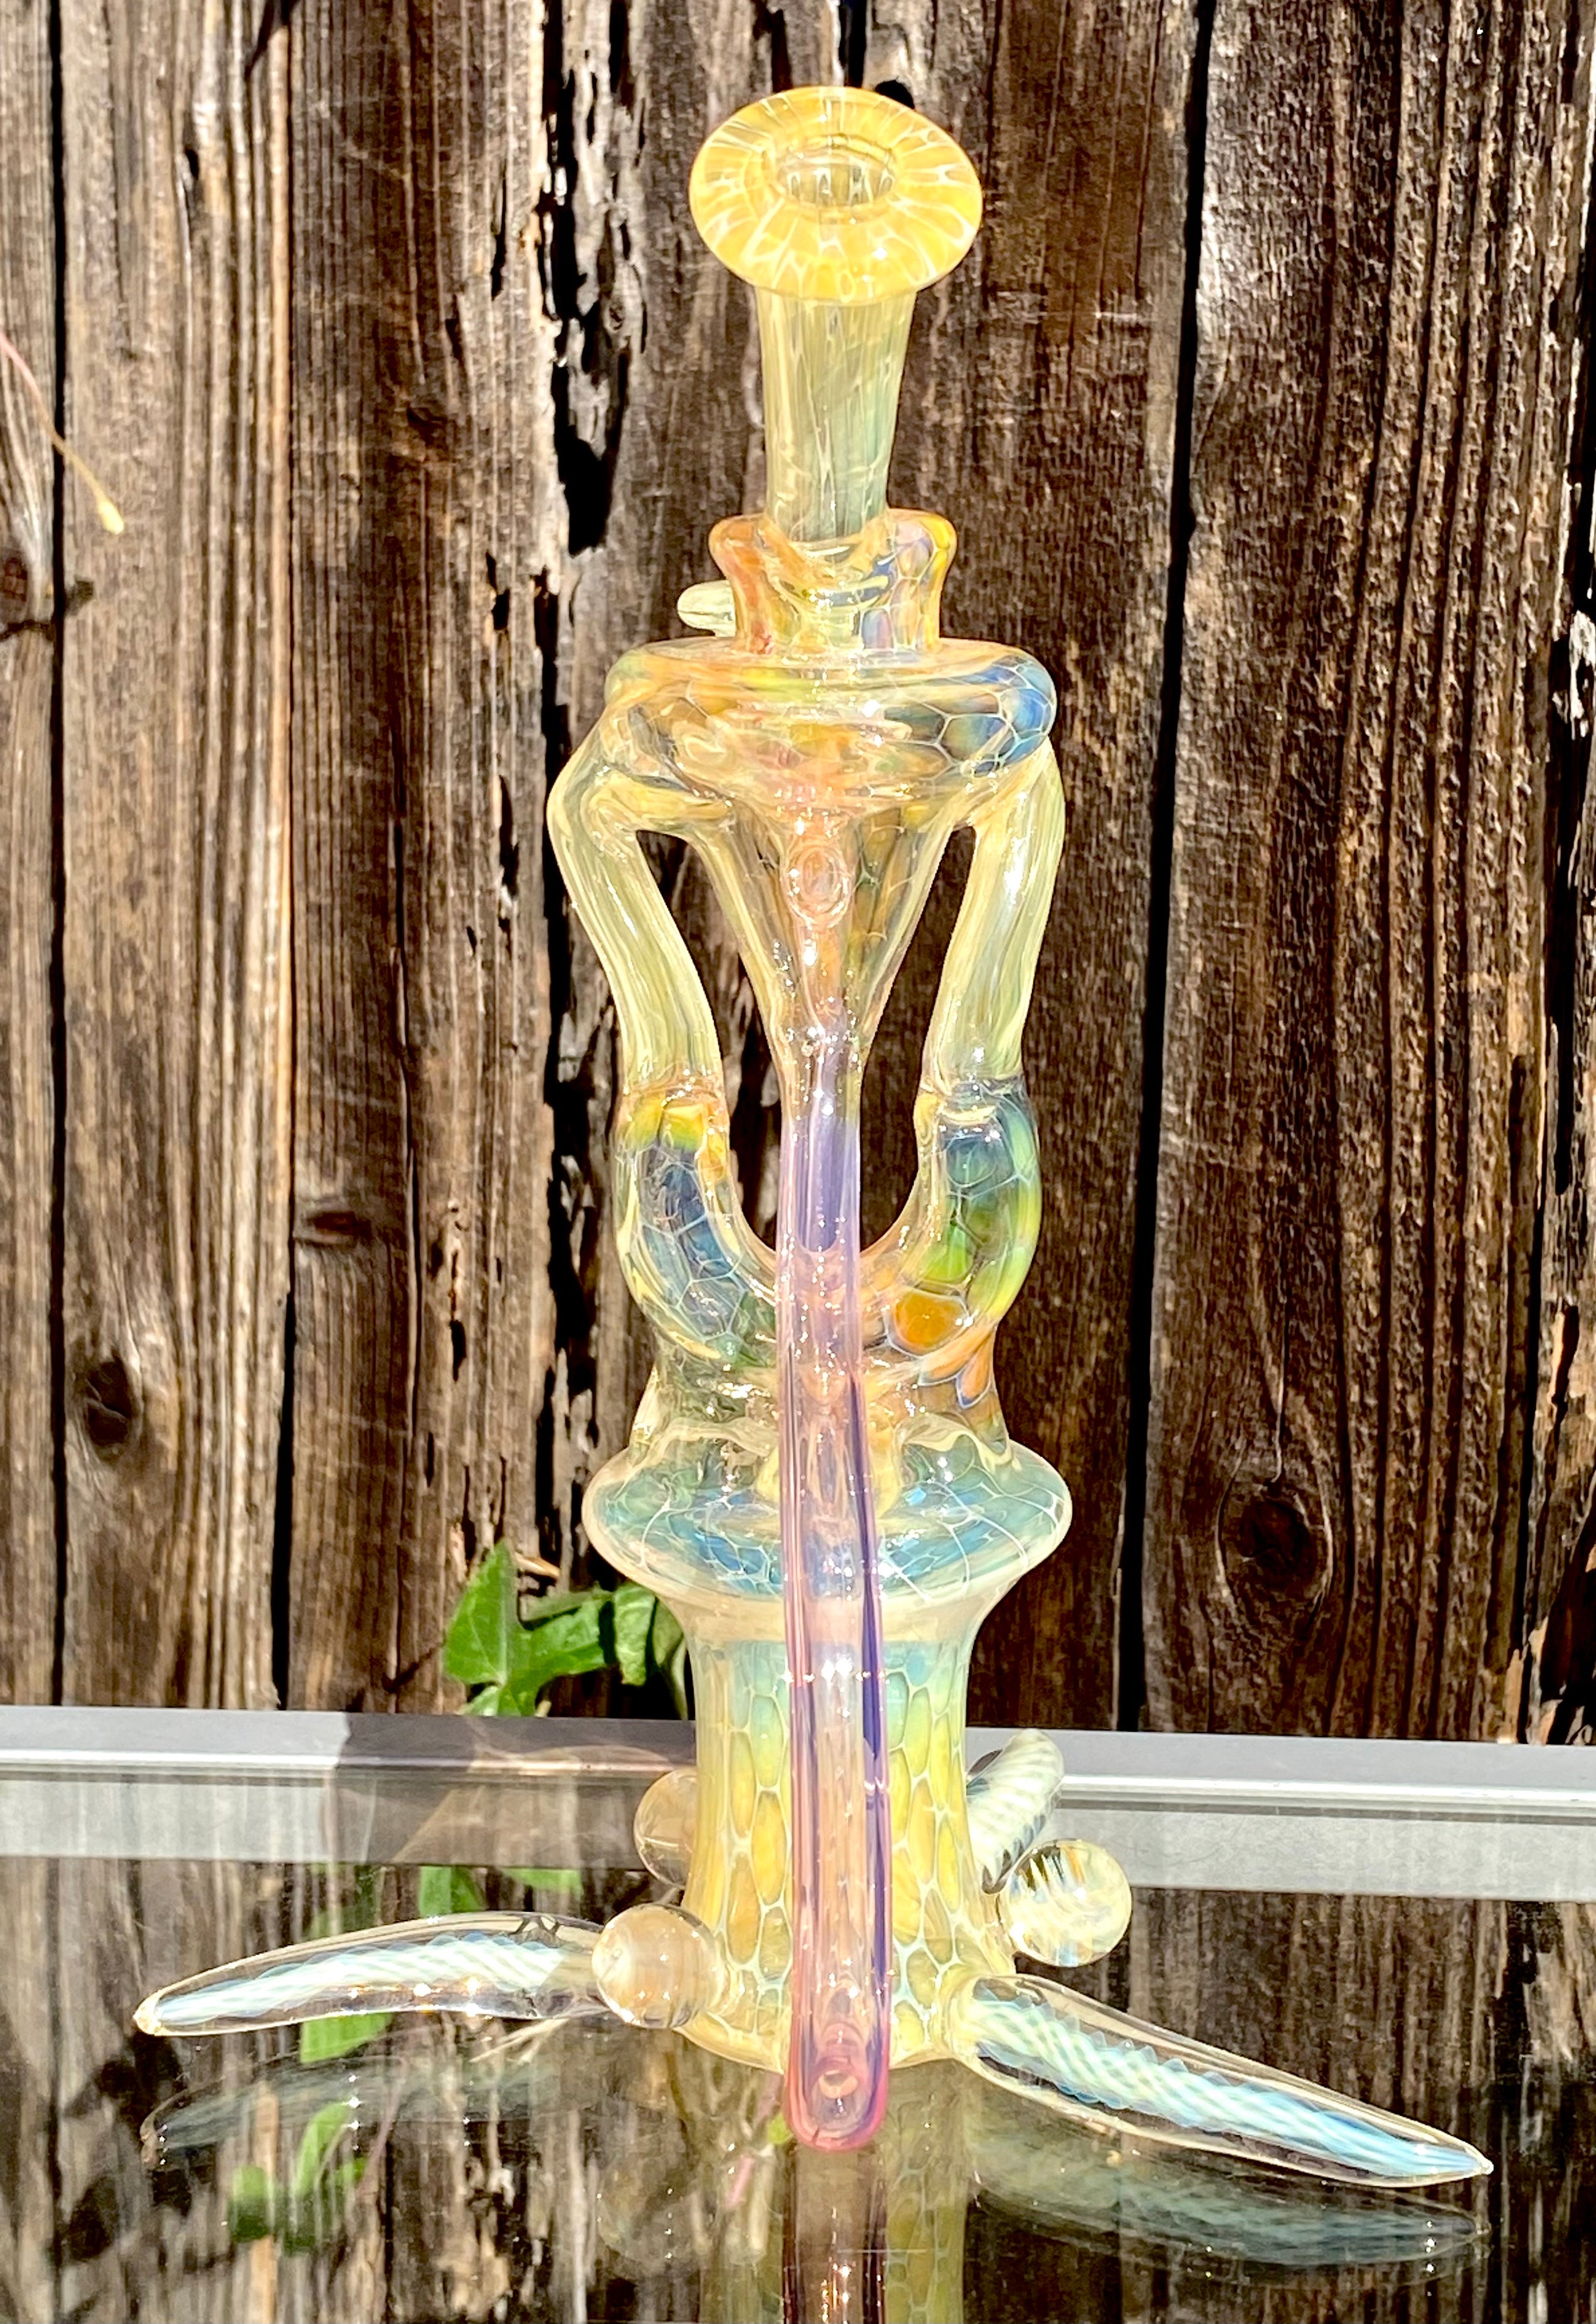 Jakers x Asthmatic Glasstastic Collab Double Uptake Fully Fumed Rig